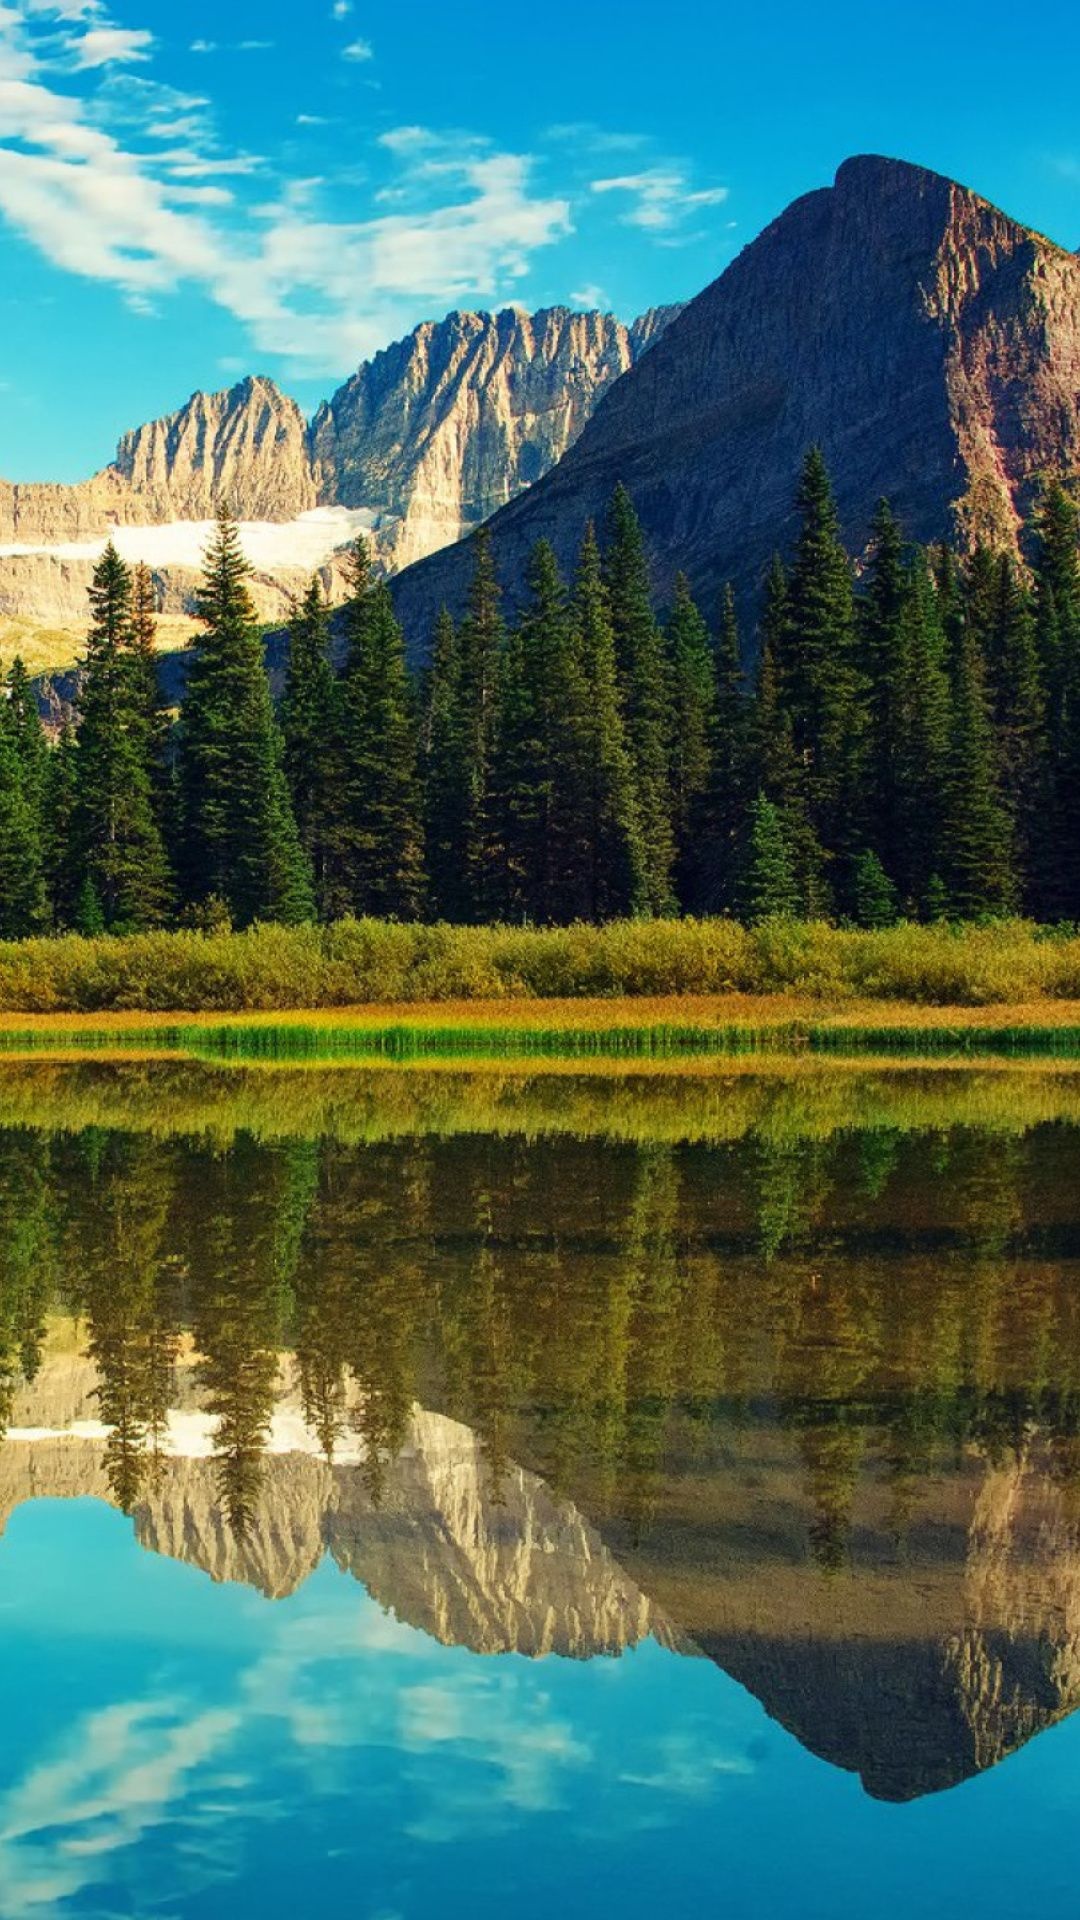 Glacier Park mobile wallpapers, Natural wonders, Mountain retreat, Spectacular views, 1080x1920 Full HD Handy